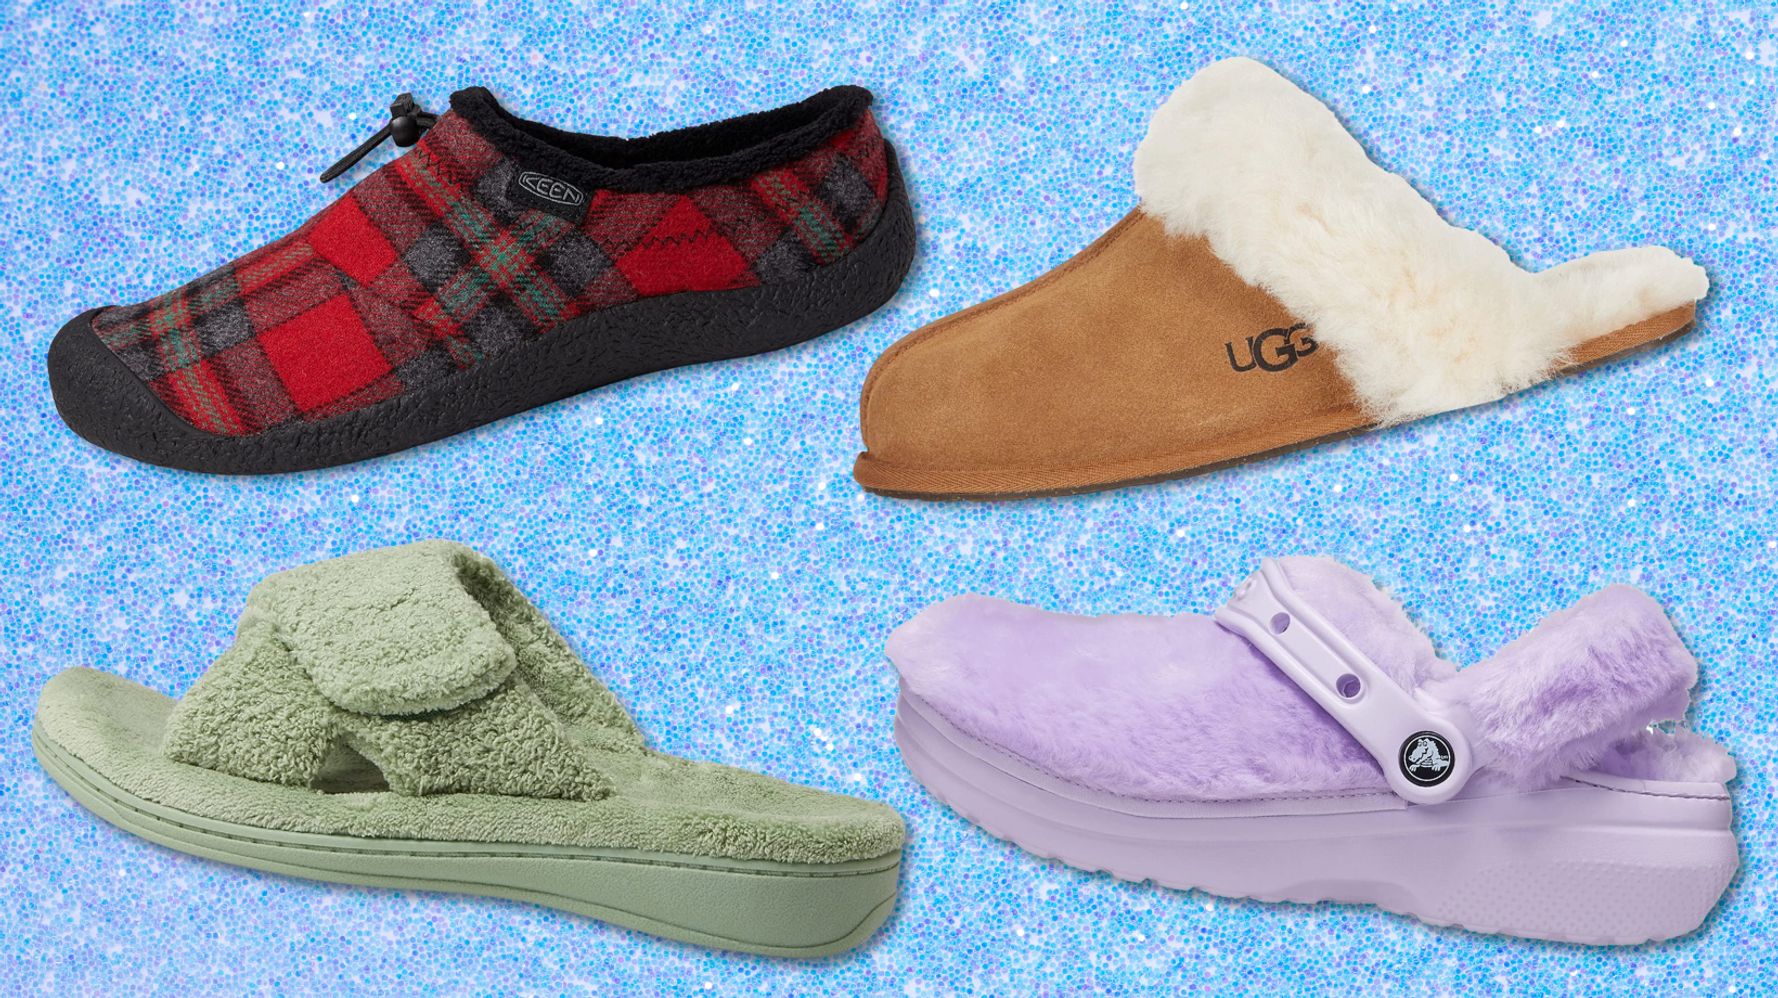 Læge blyant benzin 13 Comfy Slippers From Zappos That Make Perfect Gifts | HuffPost Life